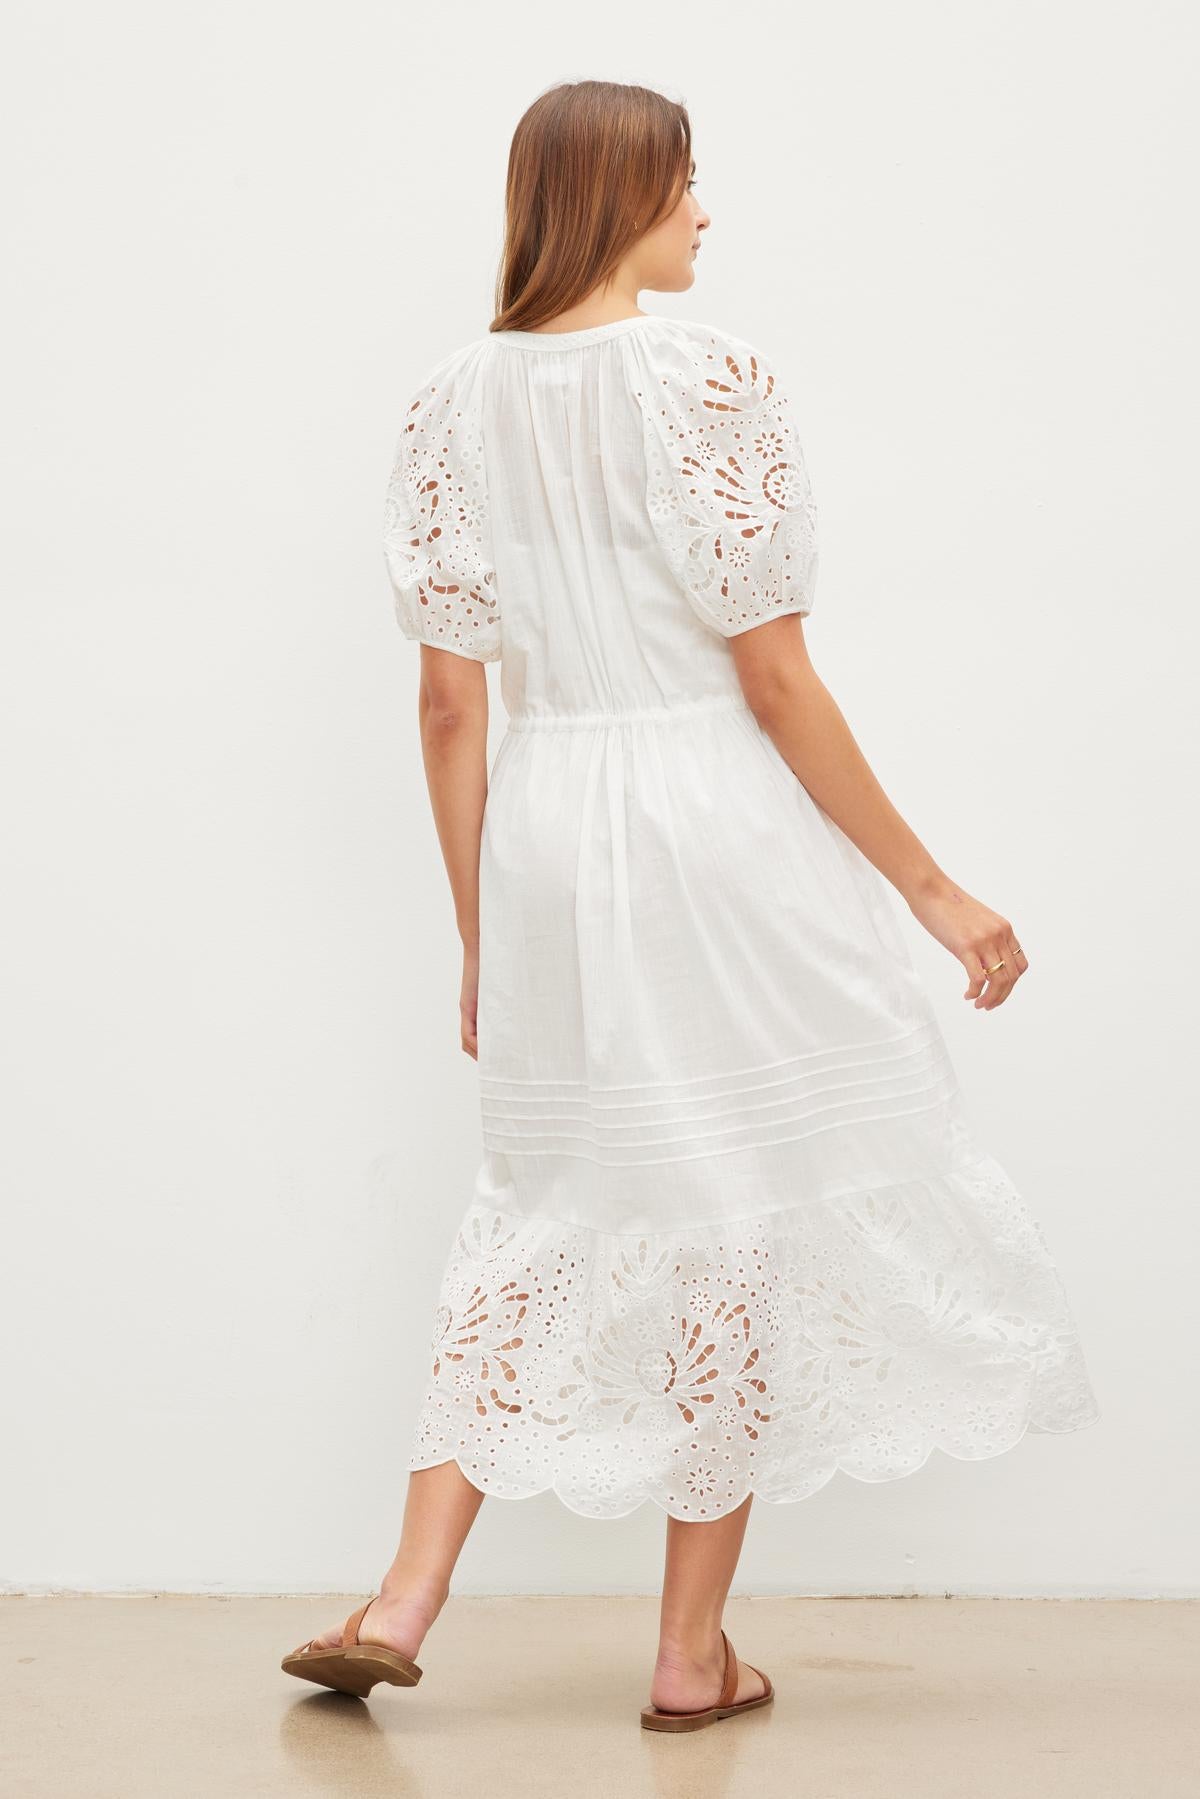 Nadia Embroidered Lace Dress